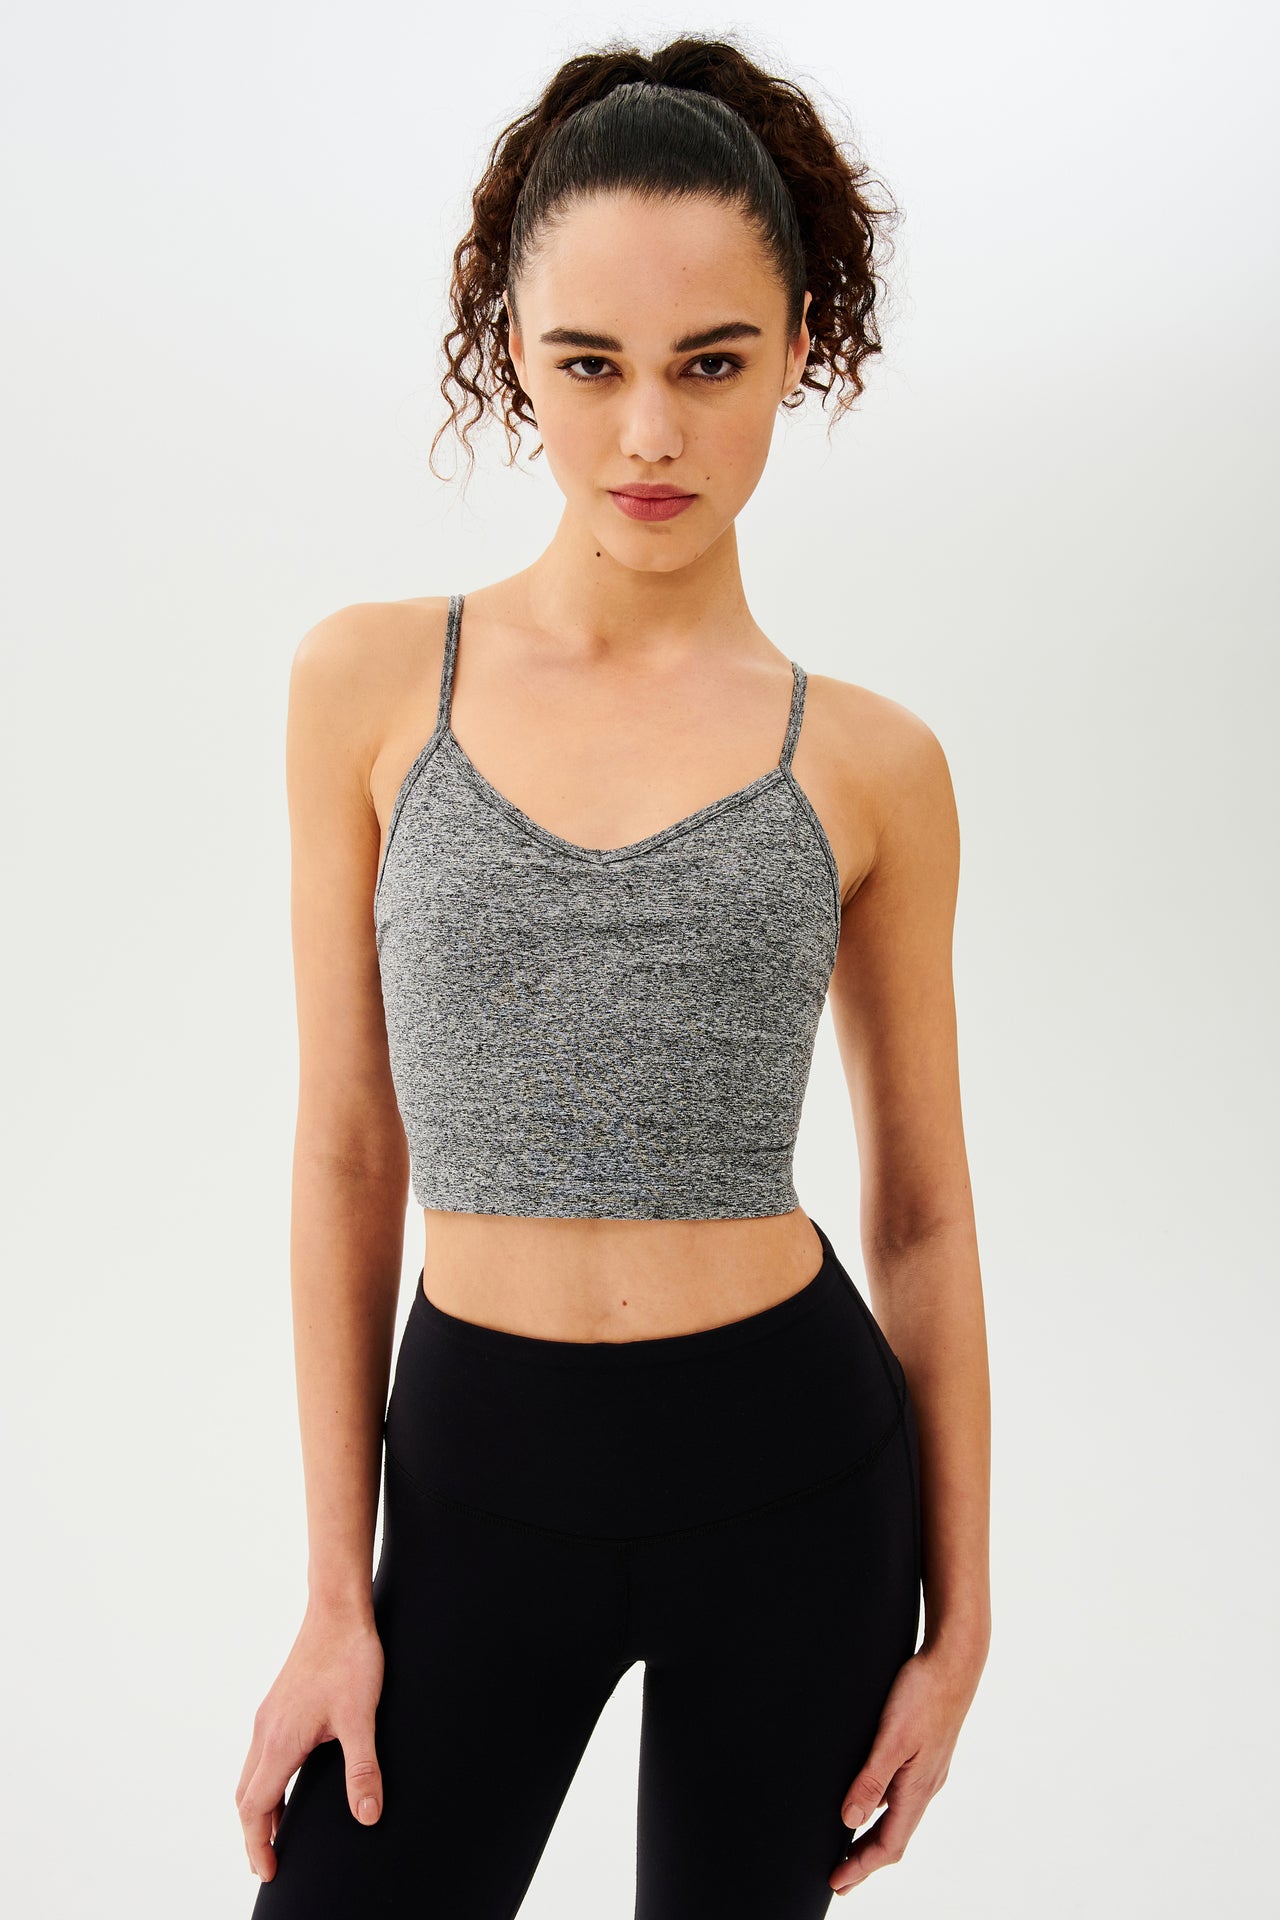 The model is wearing a Splits59 Loren Seamless Cami in Heather Grey and black leggings.